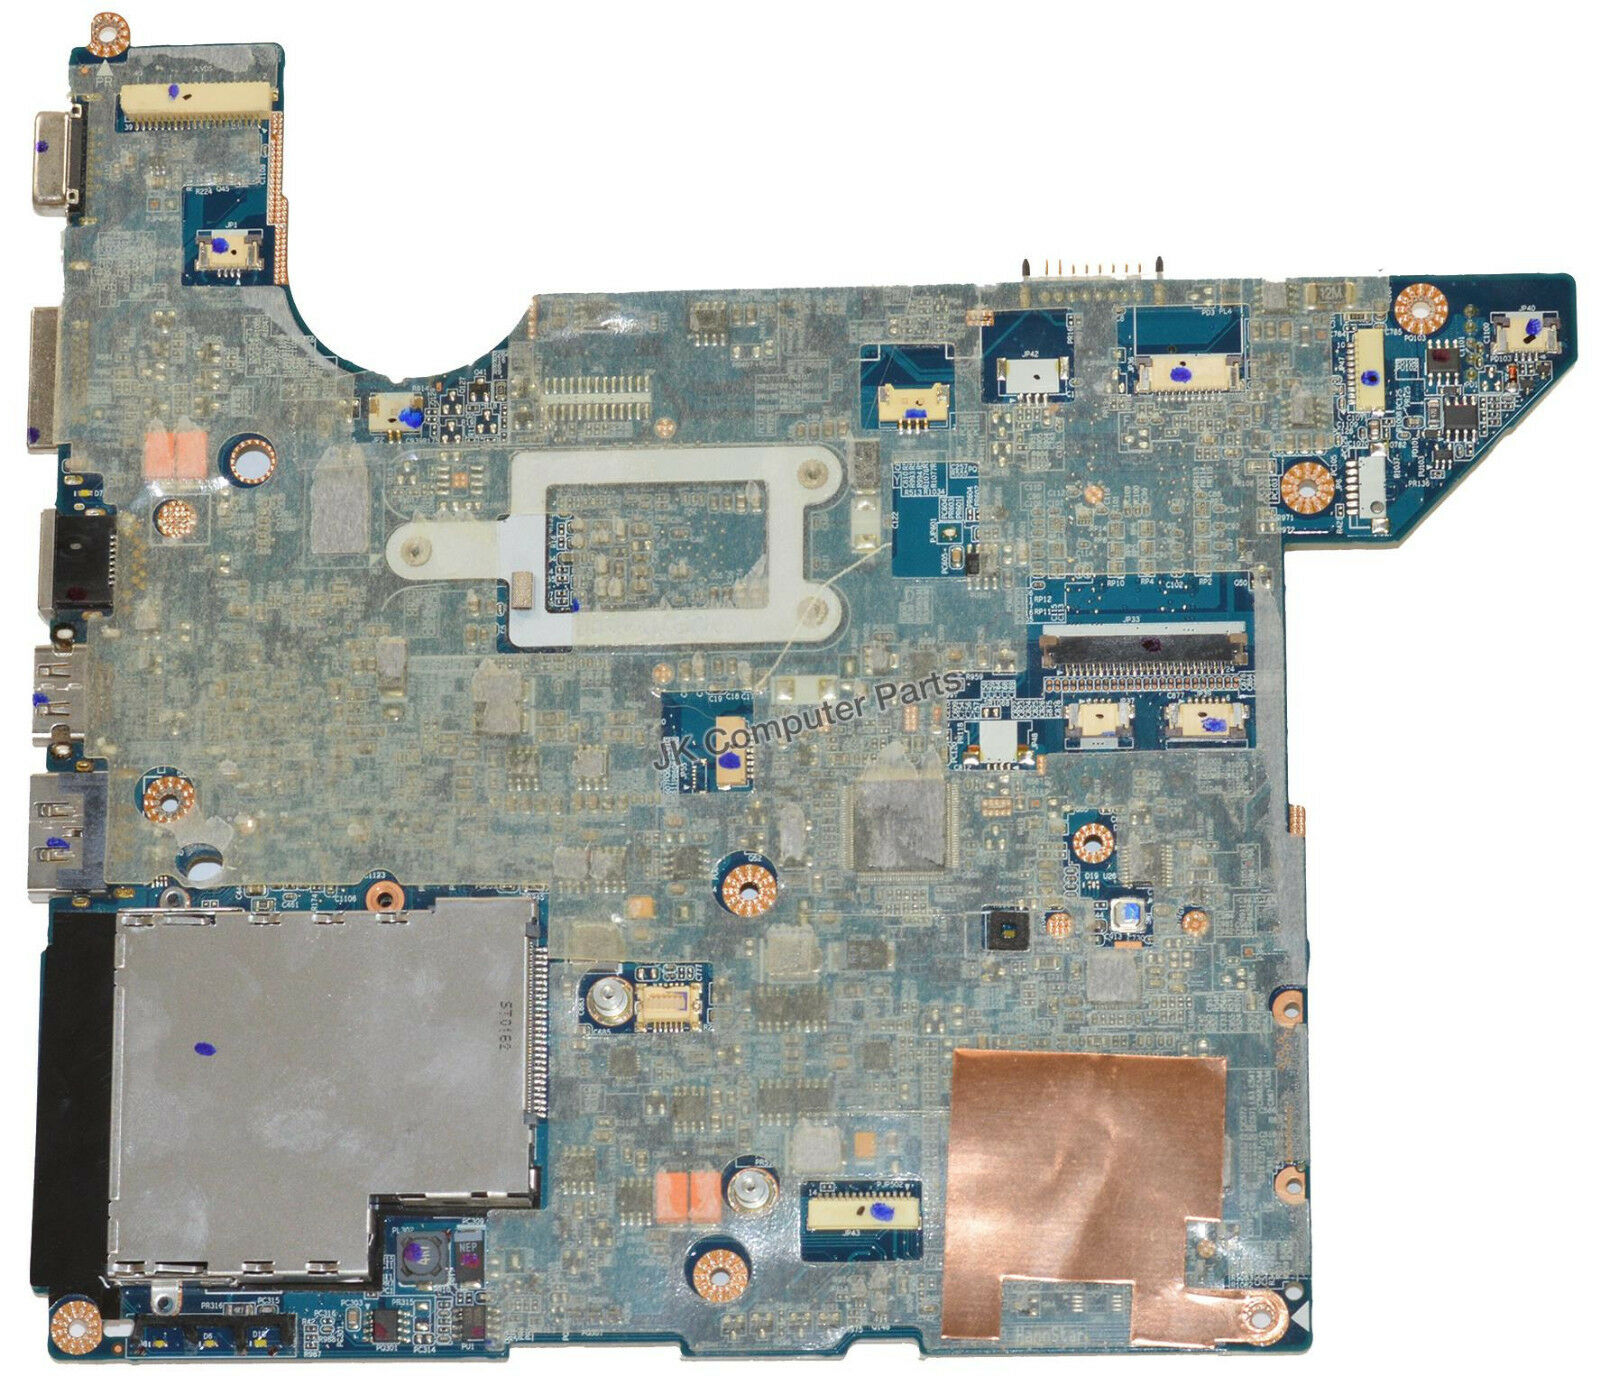 HP PAVILION DV4-2120 LAPTOP MOTHERBOARD LA-4117P 598091-001 598091001 AMD This motherboard is pulled from a